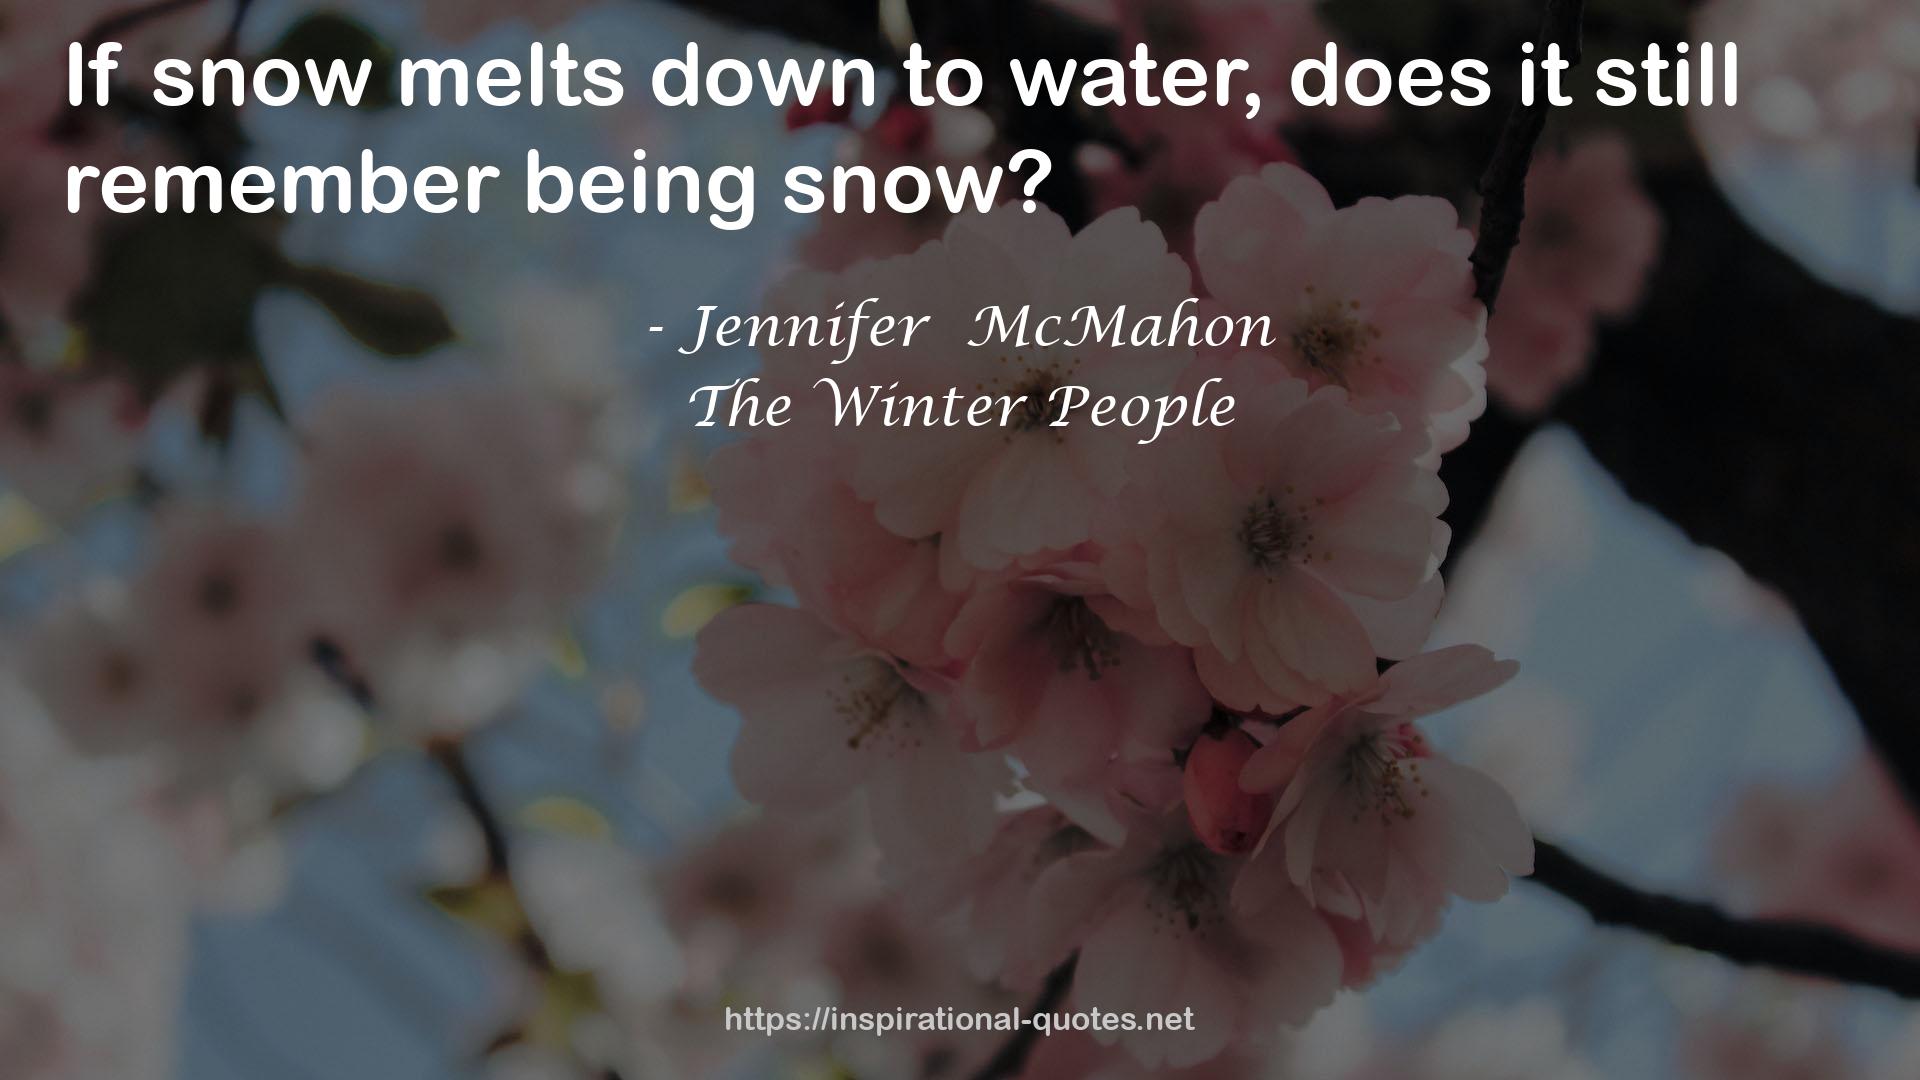 The Winter People QUOTES